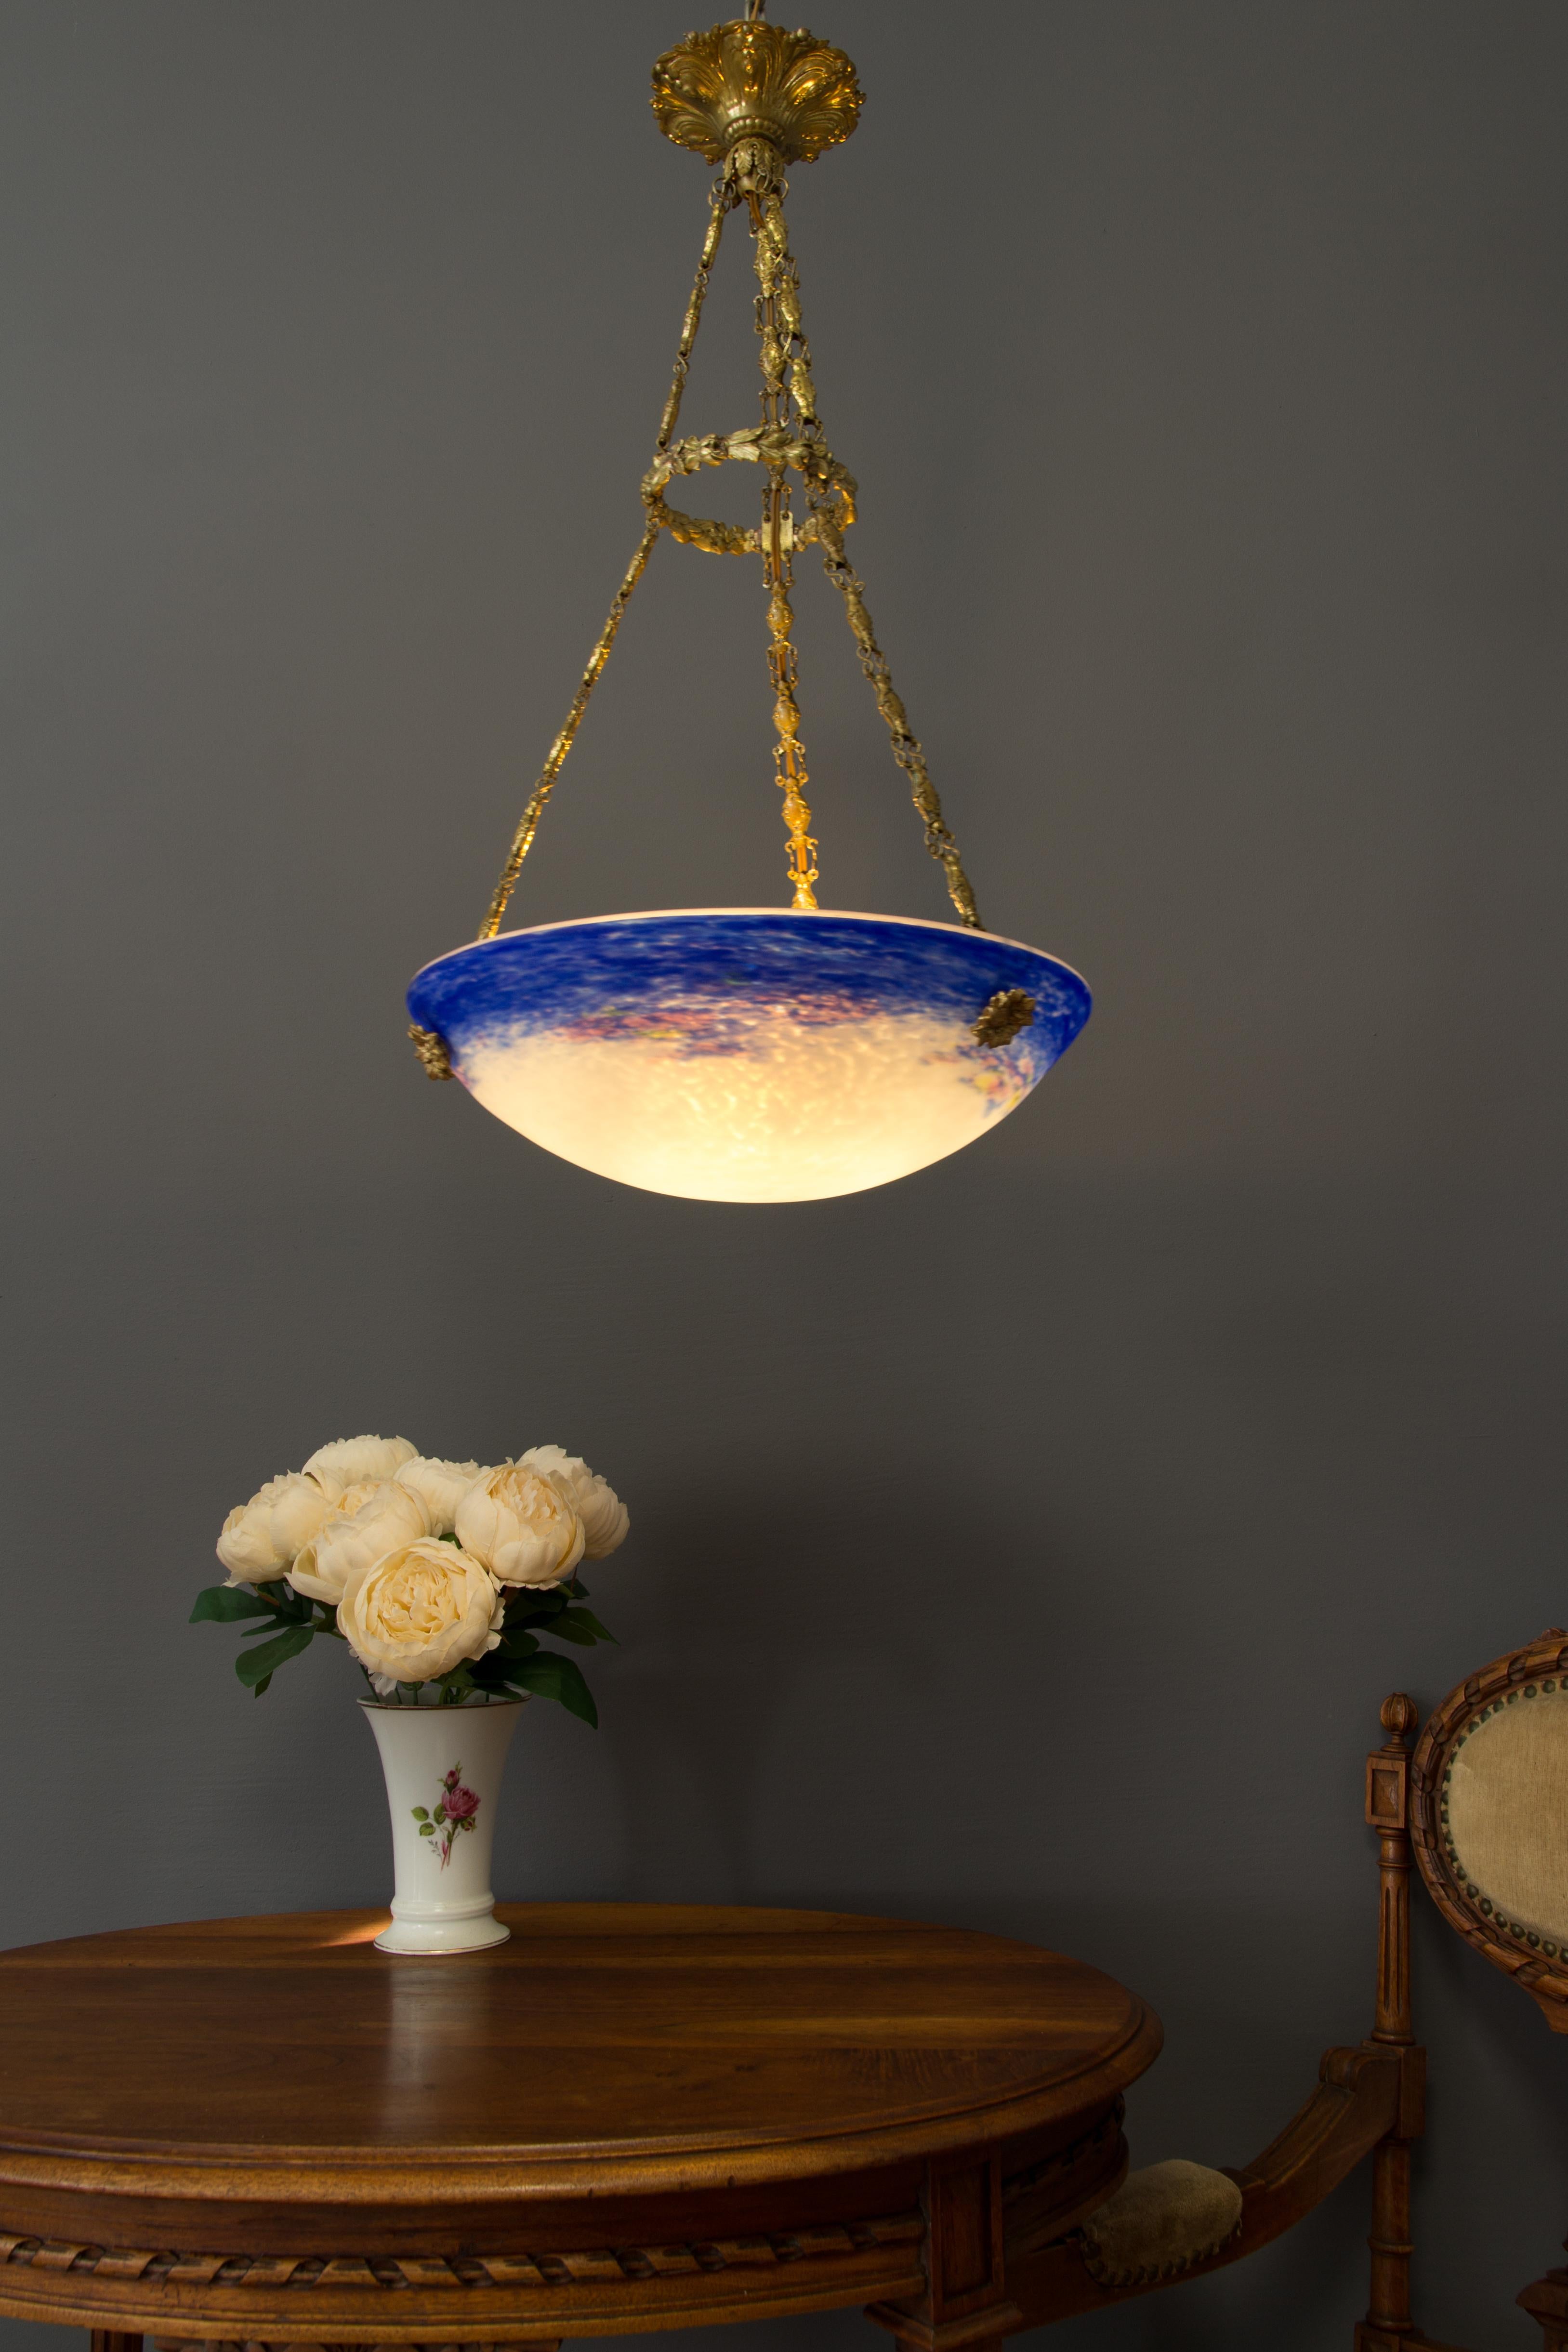 This adorable purple-blue and white French Art Nouveau period pendant chandelier features a mottled glass shade, signed” Degué”, hung at a brass and bronze fixture with one socket for an E27 light bulb.

Dimensions: diameter: 34.5 cm / 13.58 in;